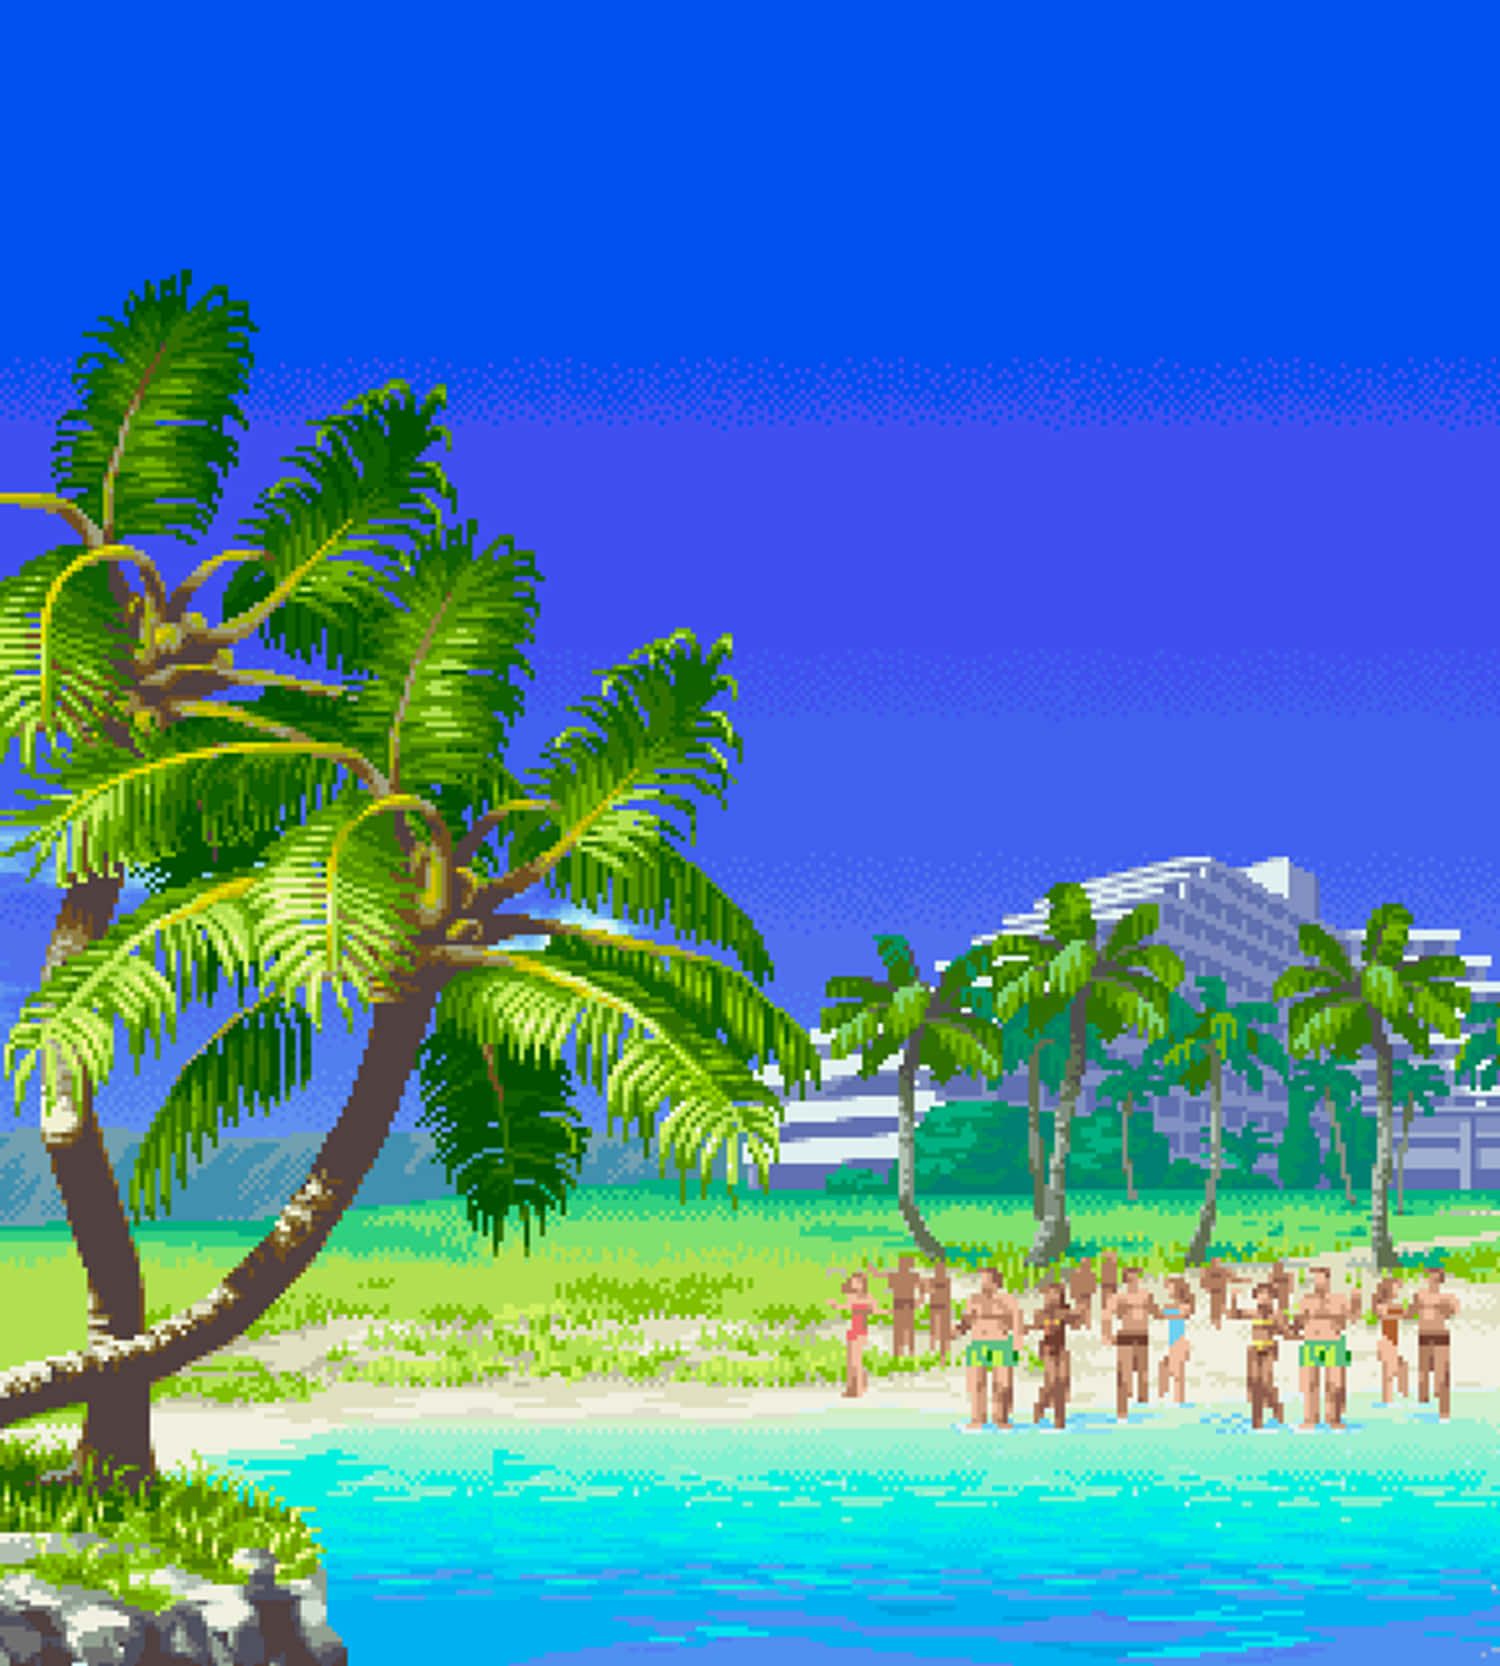 A tranquil beach scene with captivating pixels Wallpaper